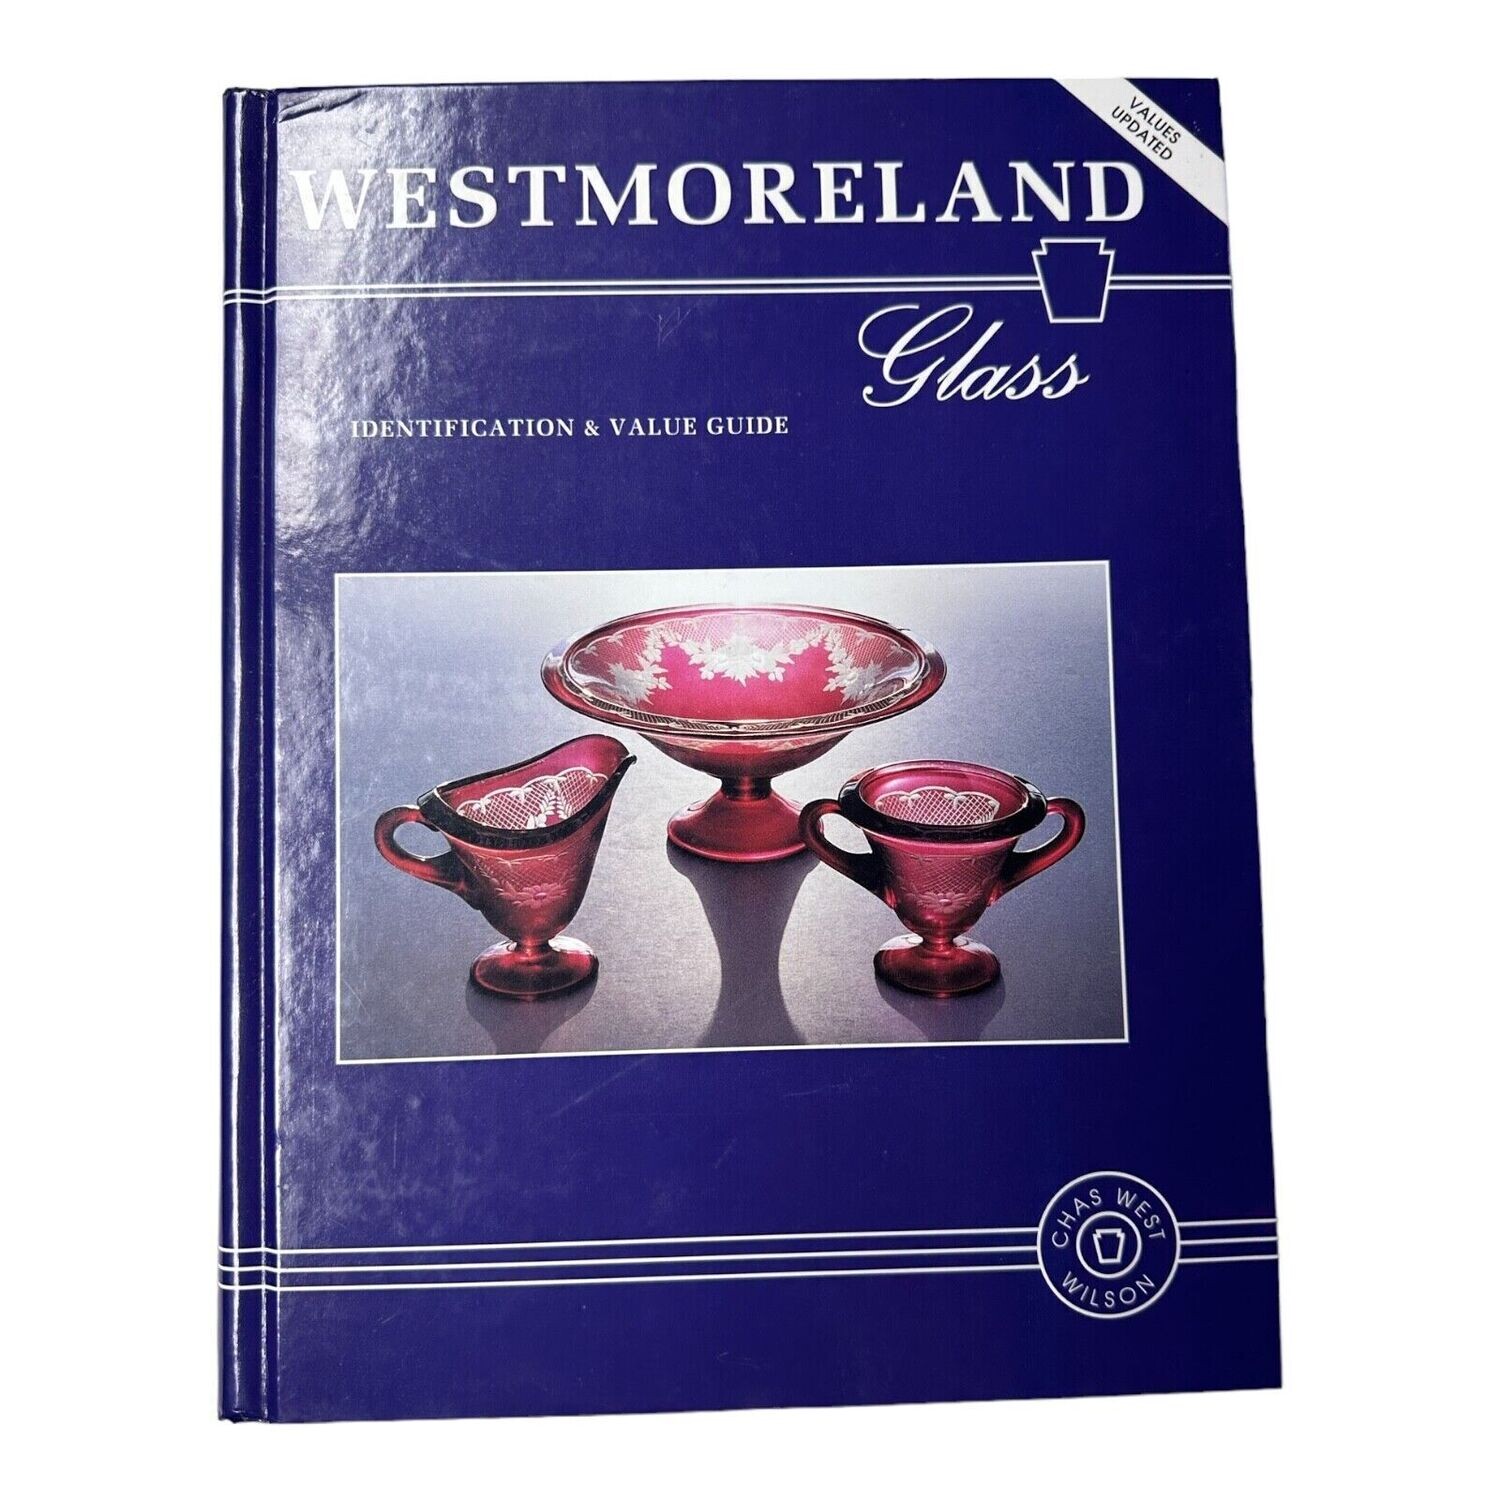 Westmoreland Glass : Identification and Value Guide by Charles W. Wilson (1996,